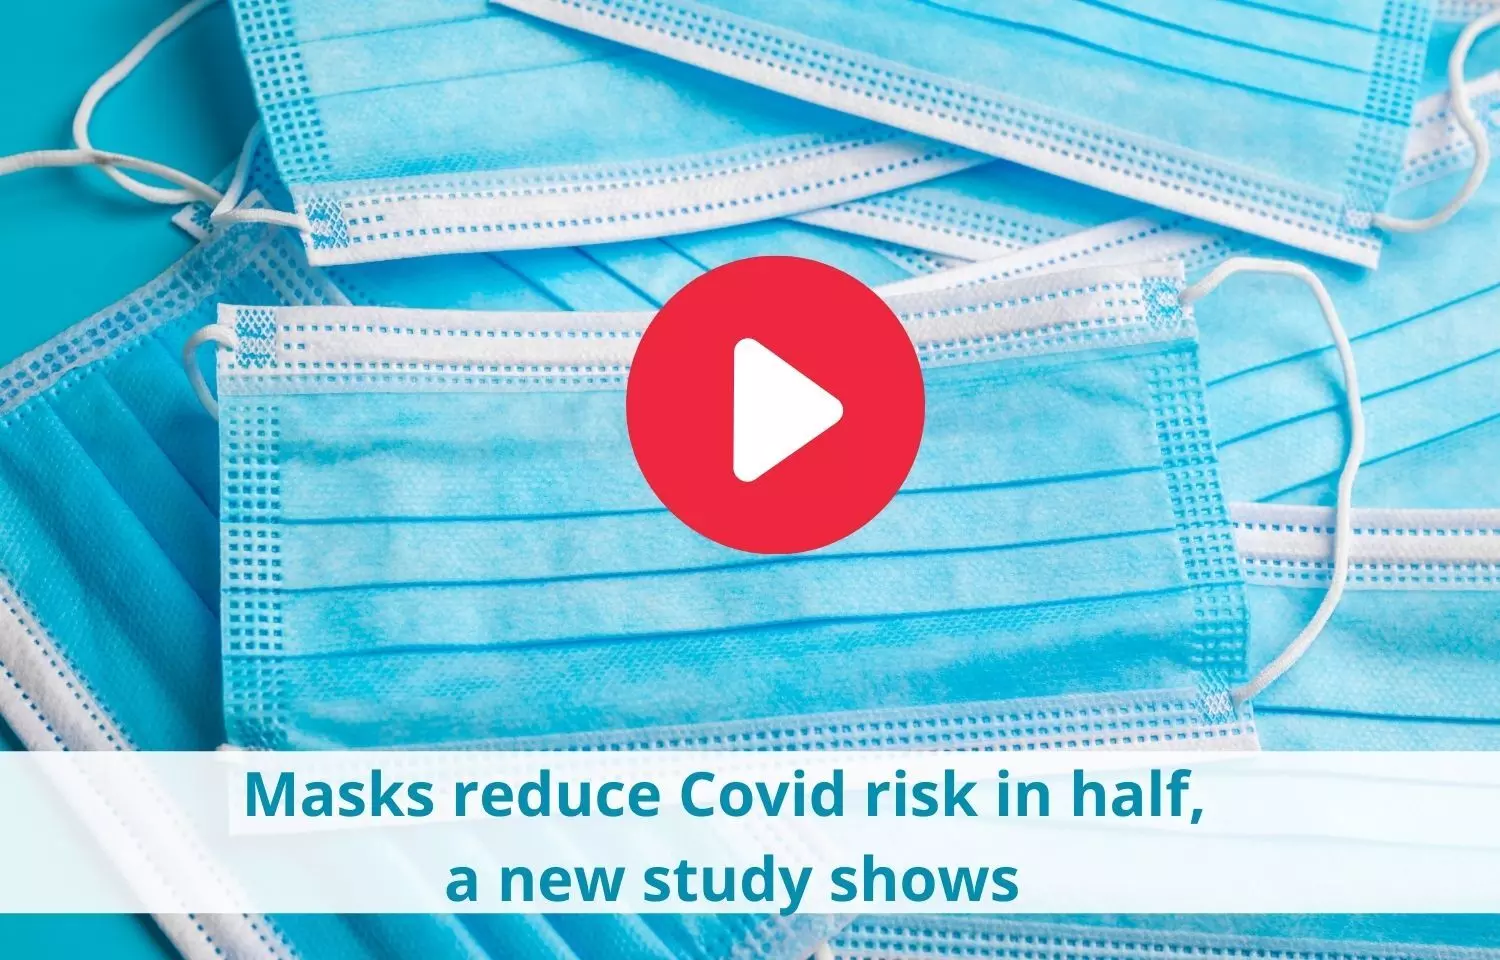 Masks reduce Covid risk in half, a new study shows